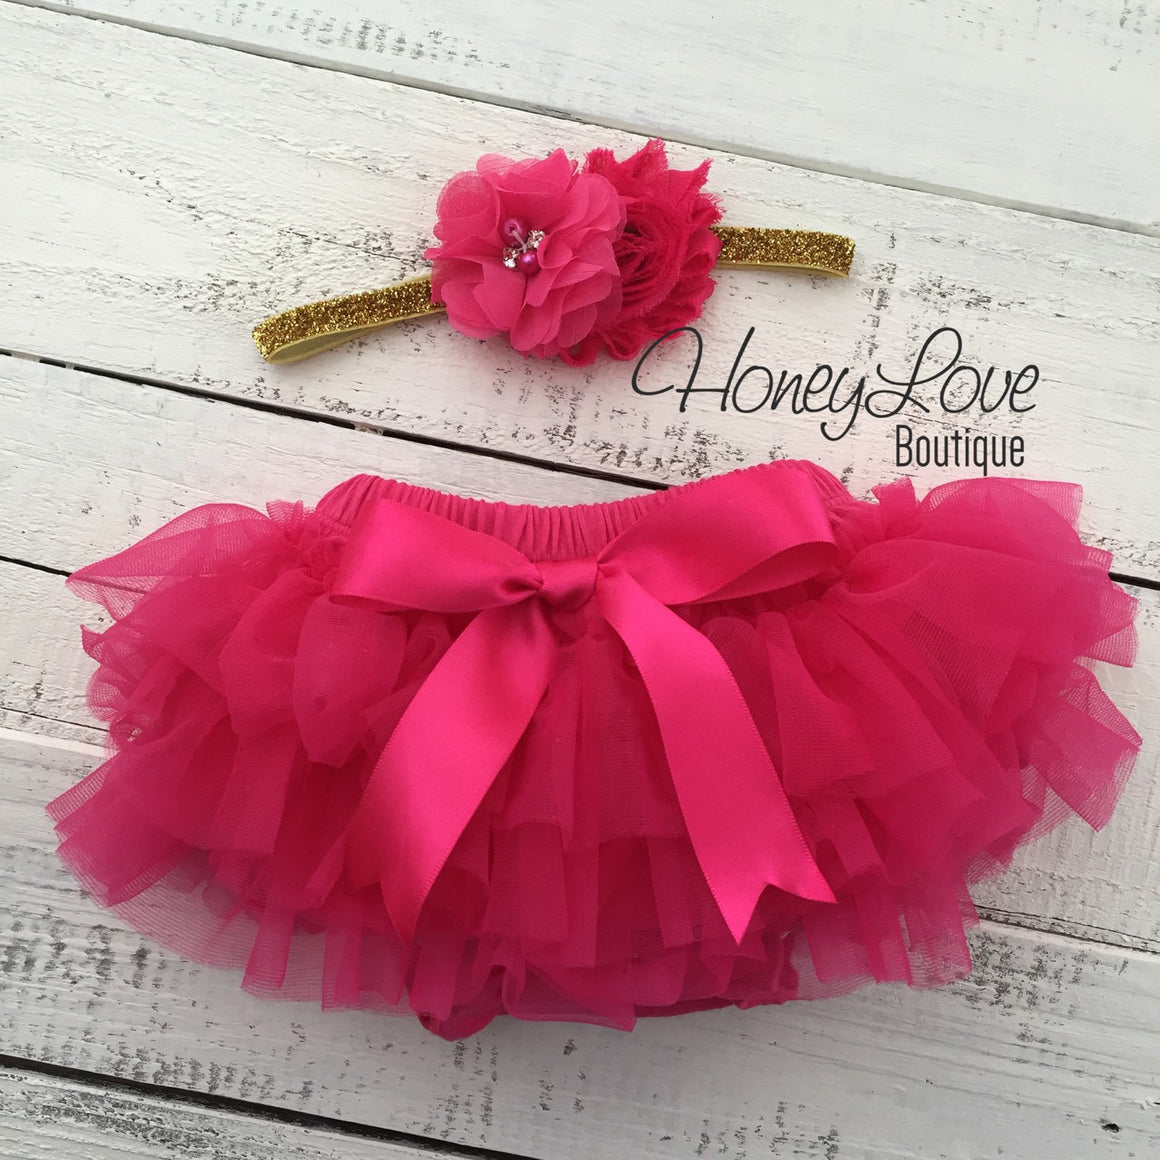 PERSONALIZED Name Outfit - Gold Glitter and Watermelon/Hot Pink - HoneyLoveBoutique